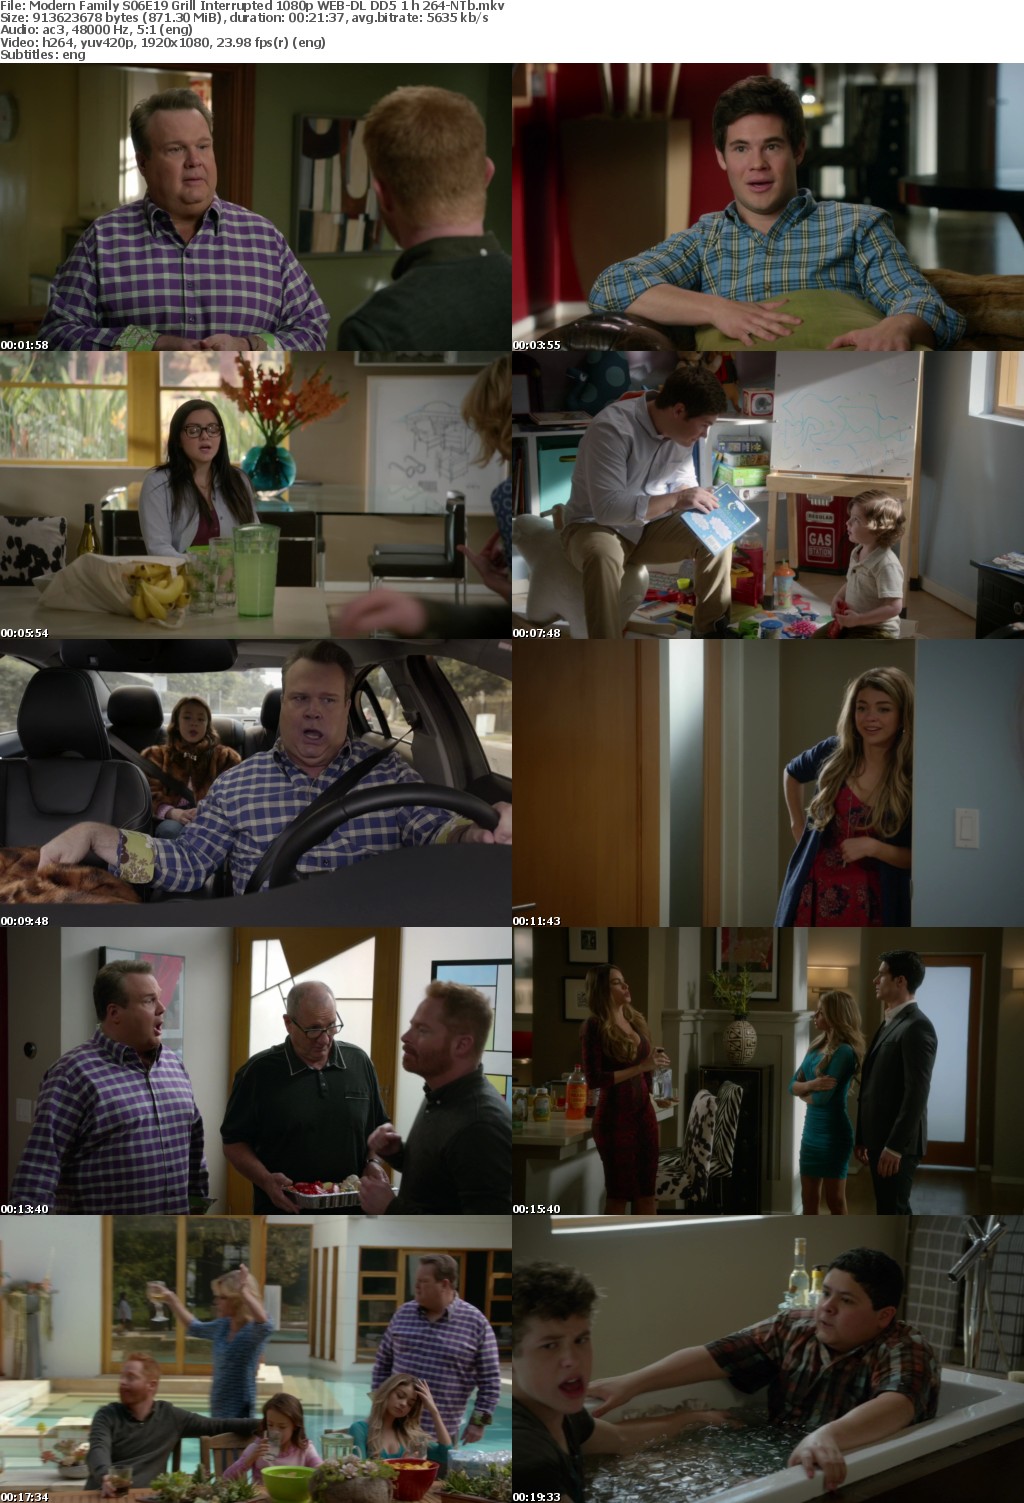 Modern Family S06E19 Grill Interrupted 1080p WEB-DL DD5 1 h 264-NTb